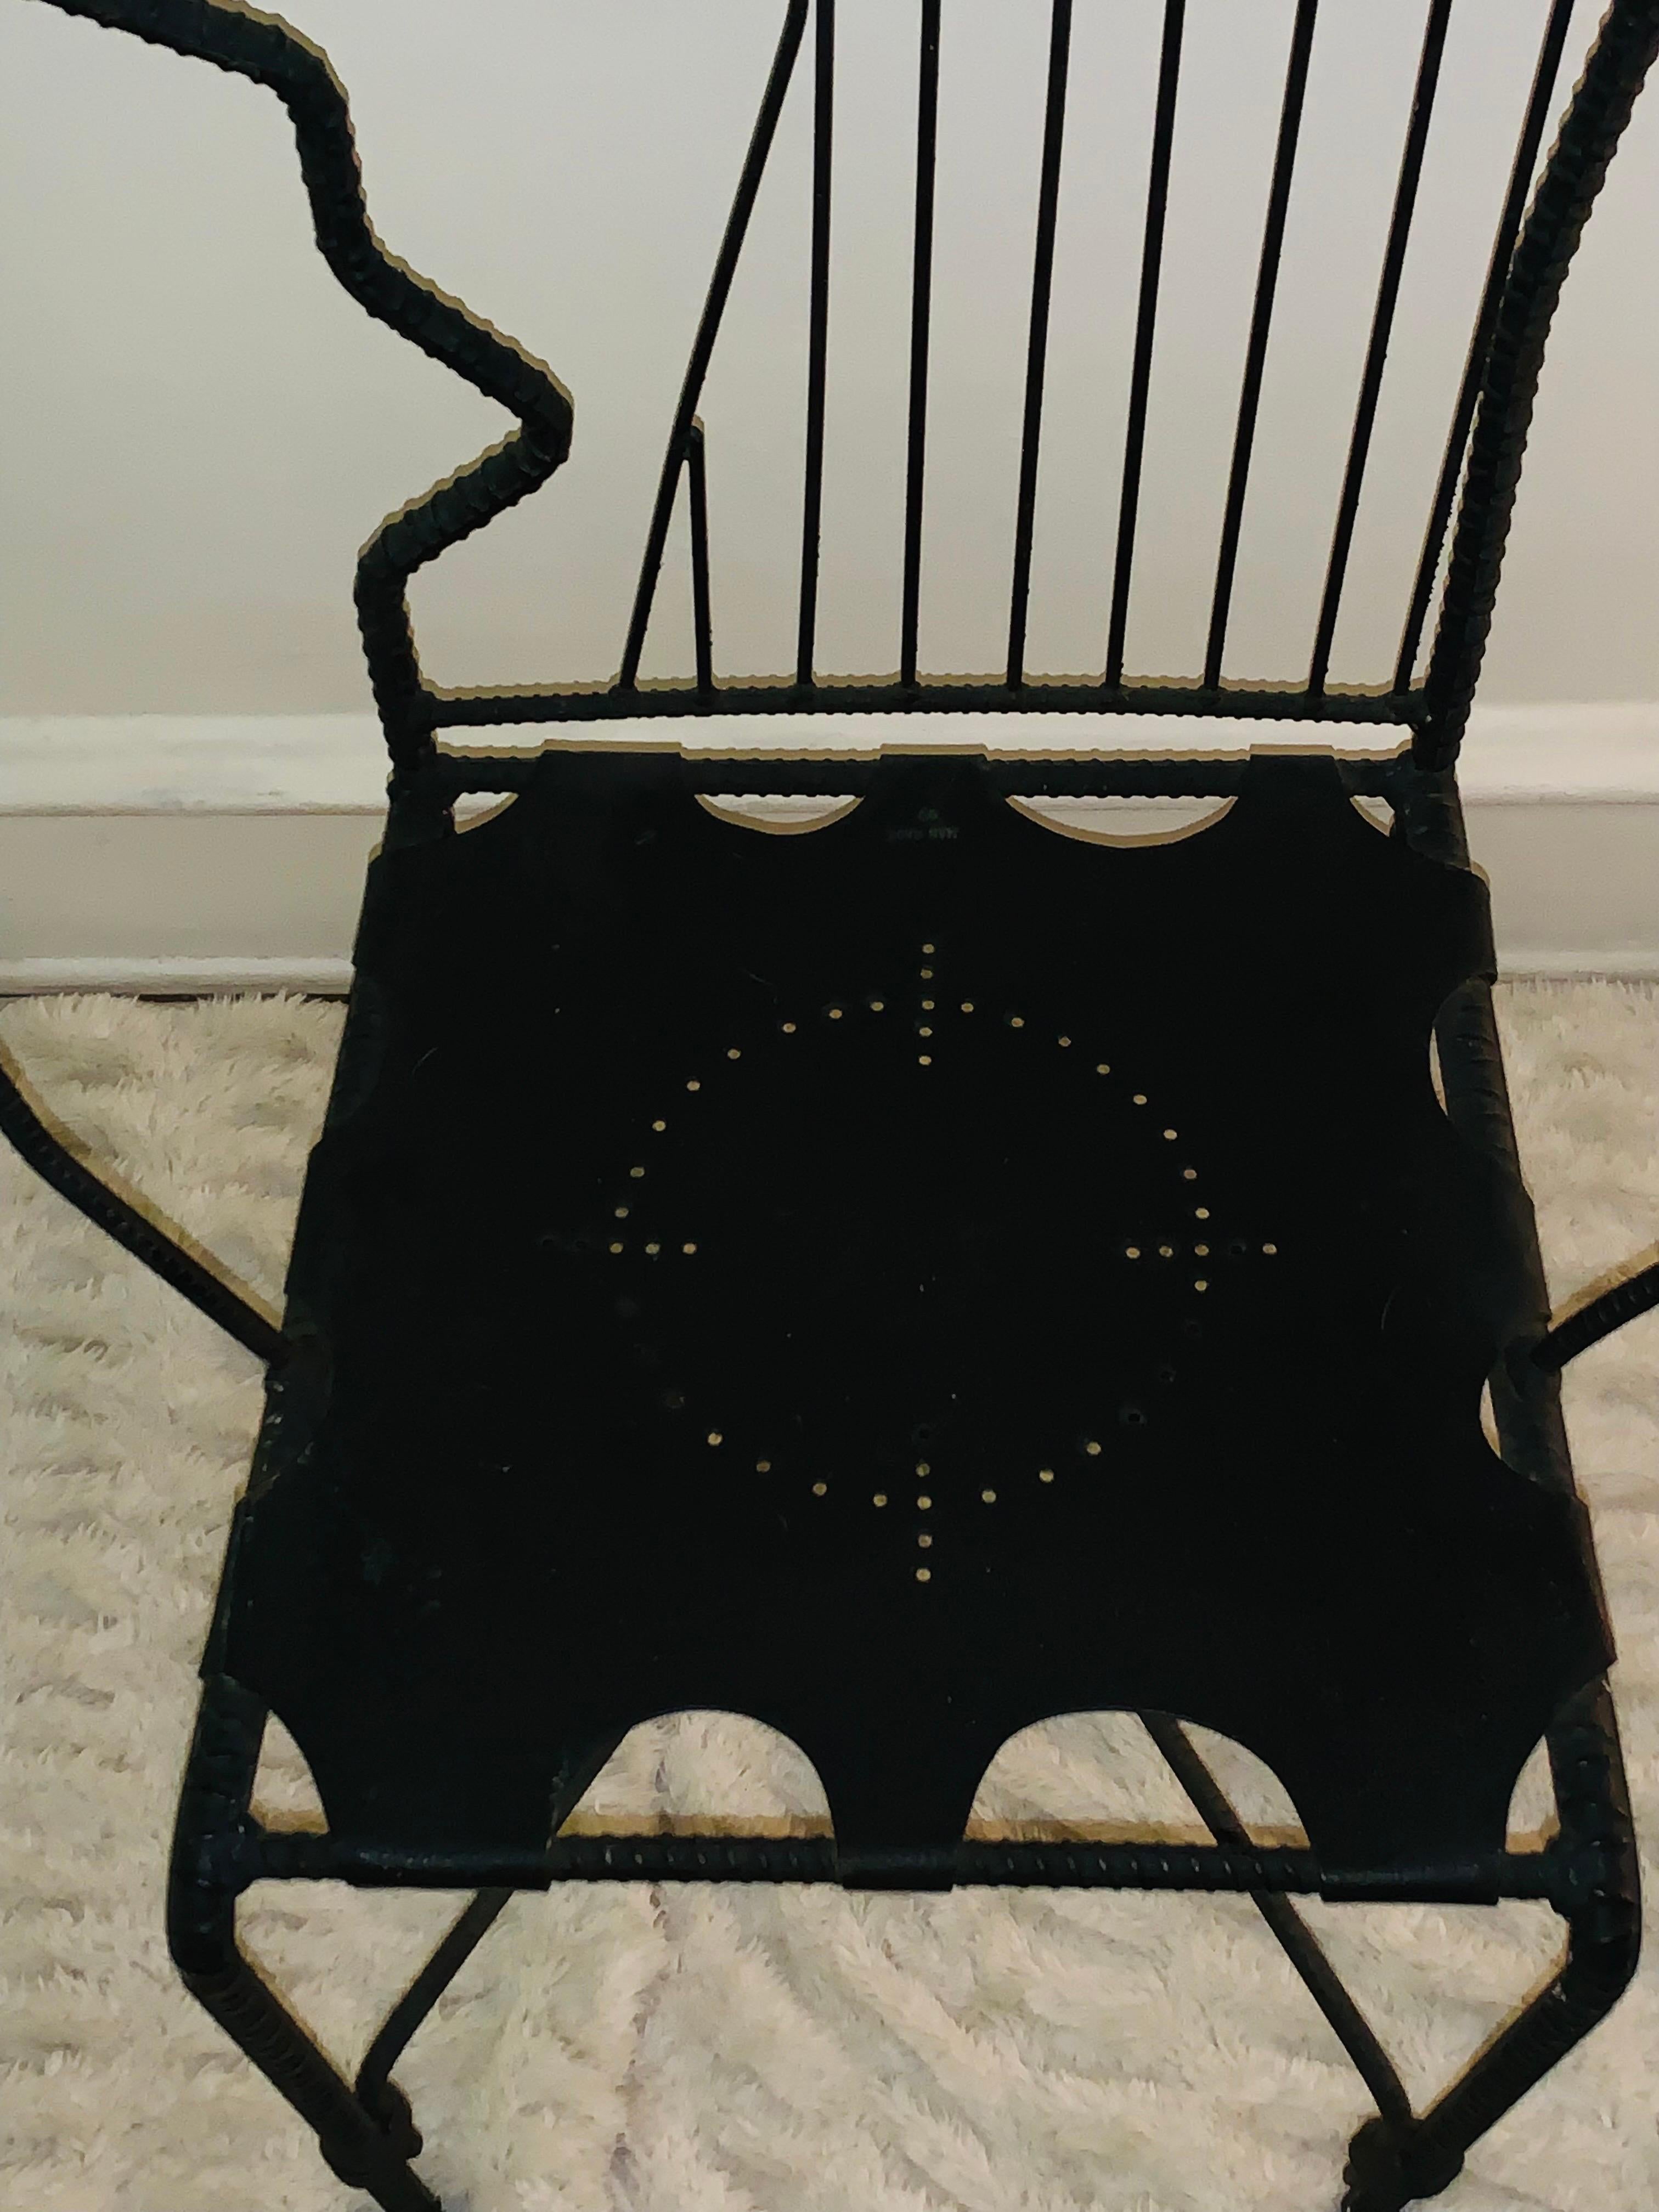 Welded Sculptural Iron Face Chairs by Industrial Artist Ries Niemi, 1990- a pair